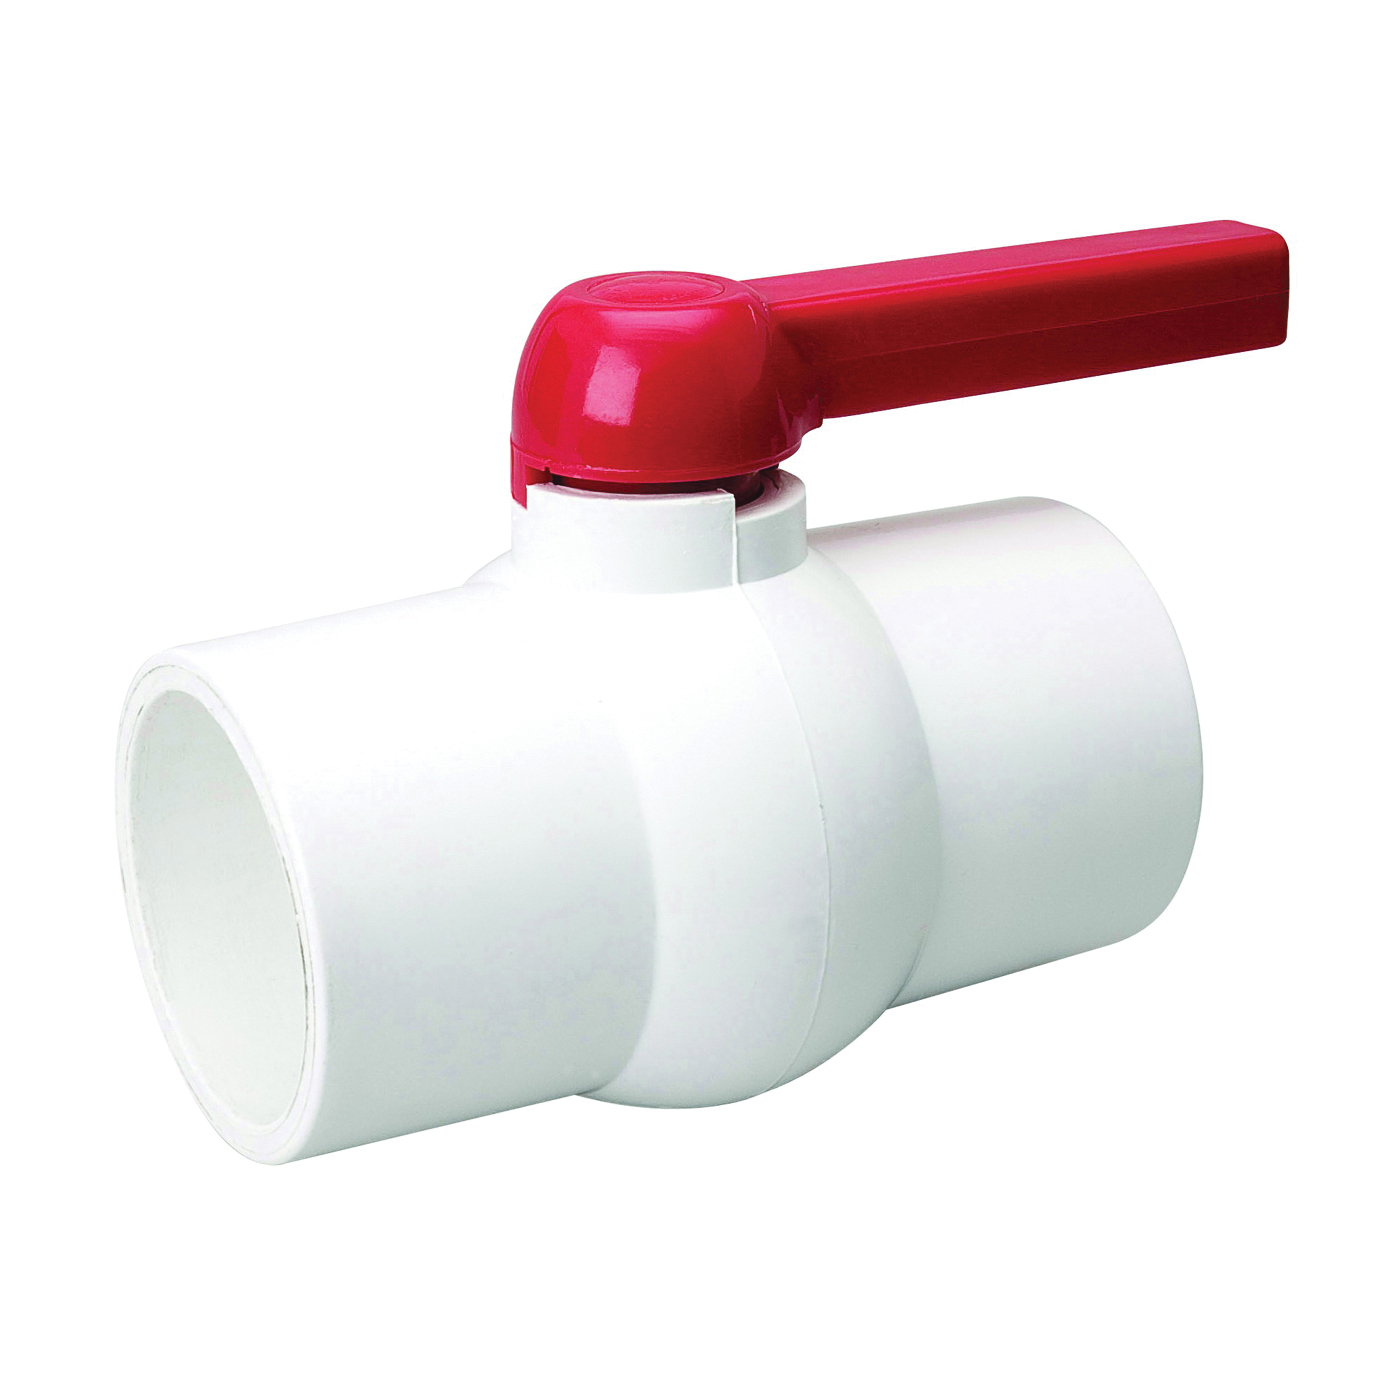 B & K 107-640 Ball Valve, 3 in Connection, Compression, 150 psi Pressure, Manual Actuator, PVC Body